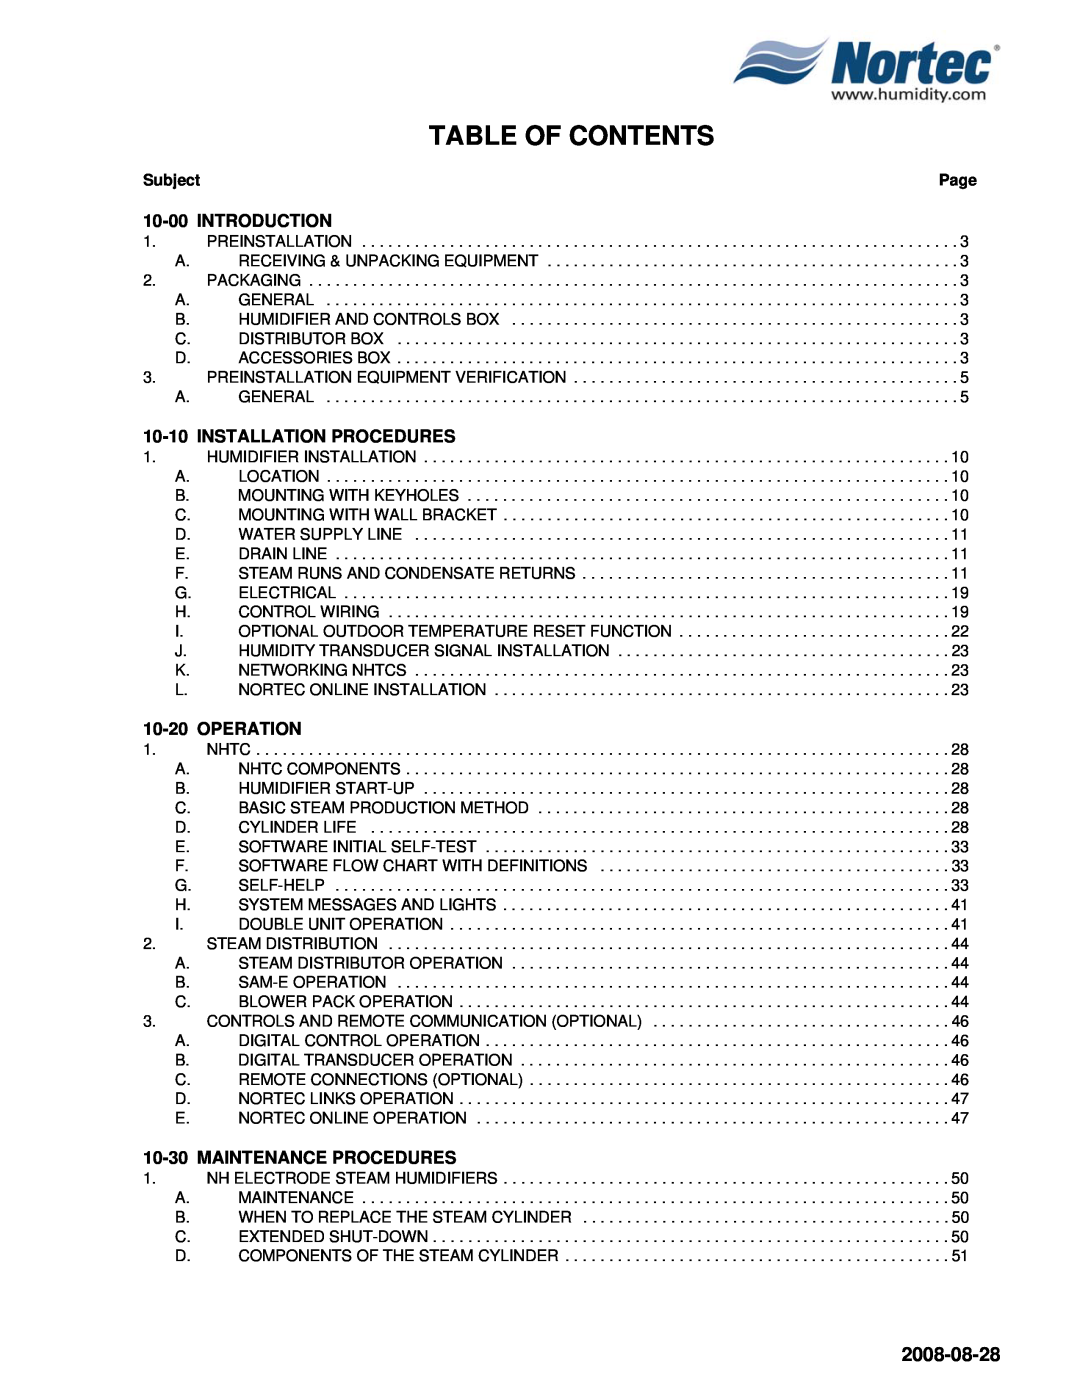 Nortec NH Series Table Of Contents, 2008-08-28, 10-00INTRODUCTION, 10-10INSTALLATION PROCEDURES, 10-20OPERATION, Subject 